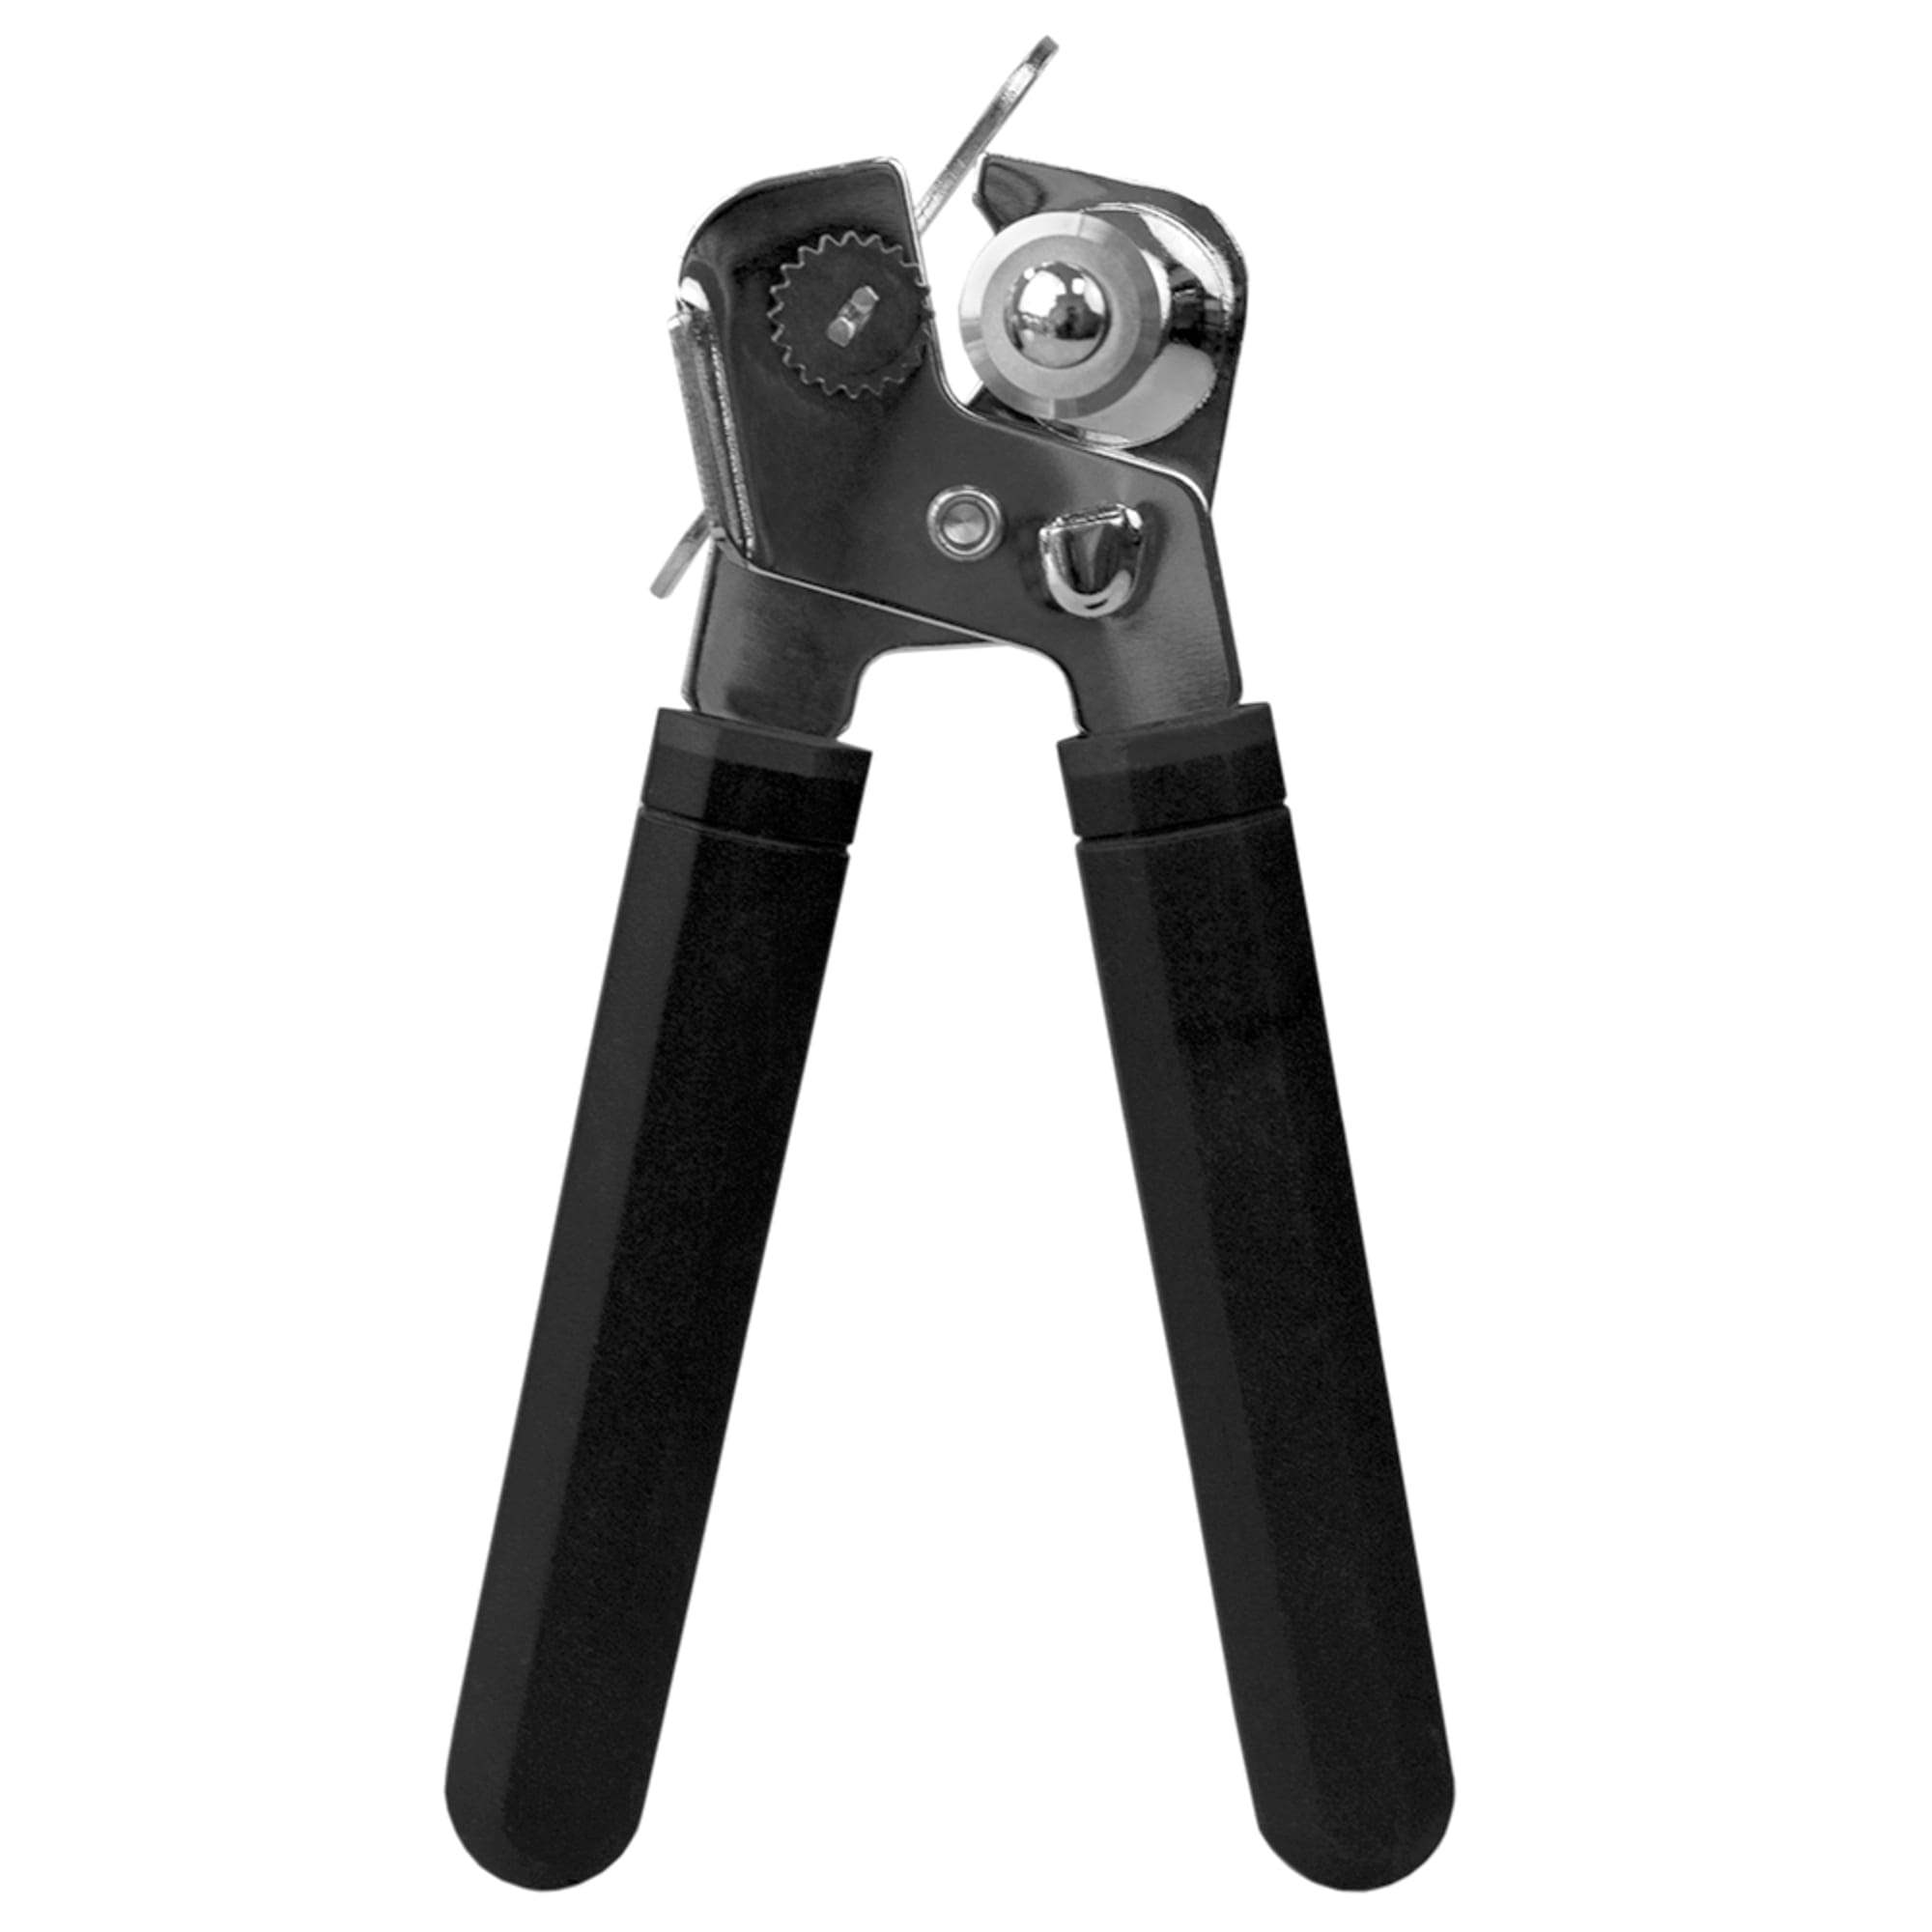 Home Basics Stainless Steel Manual Handheld Can Opener with Long Smooth Grip Rubber Handles, Black $2.00 EACH, CASE PACK OF 24